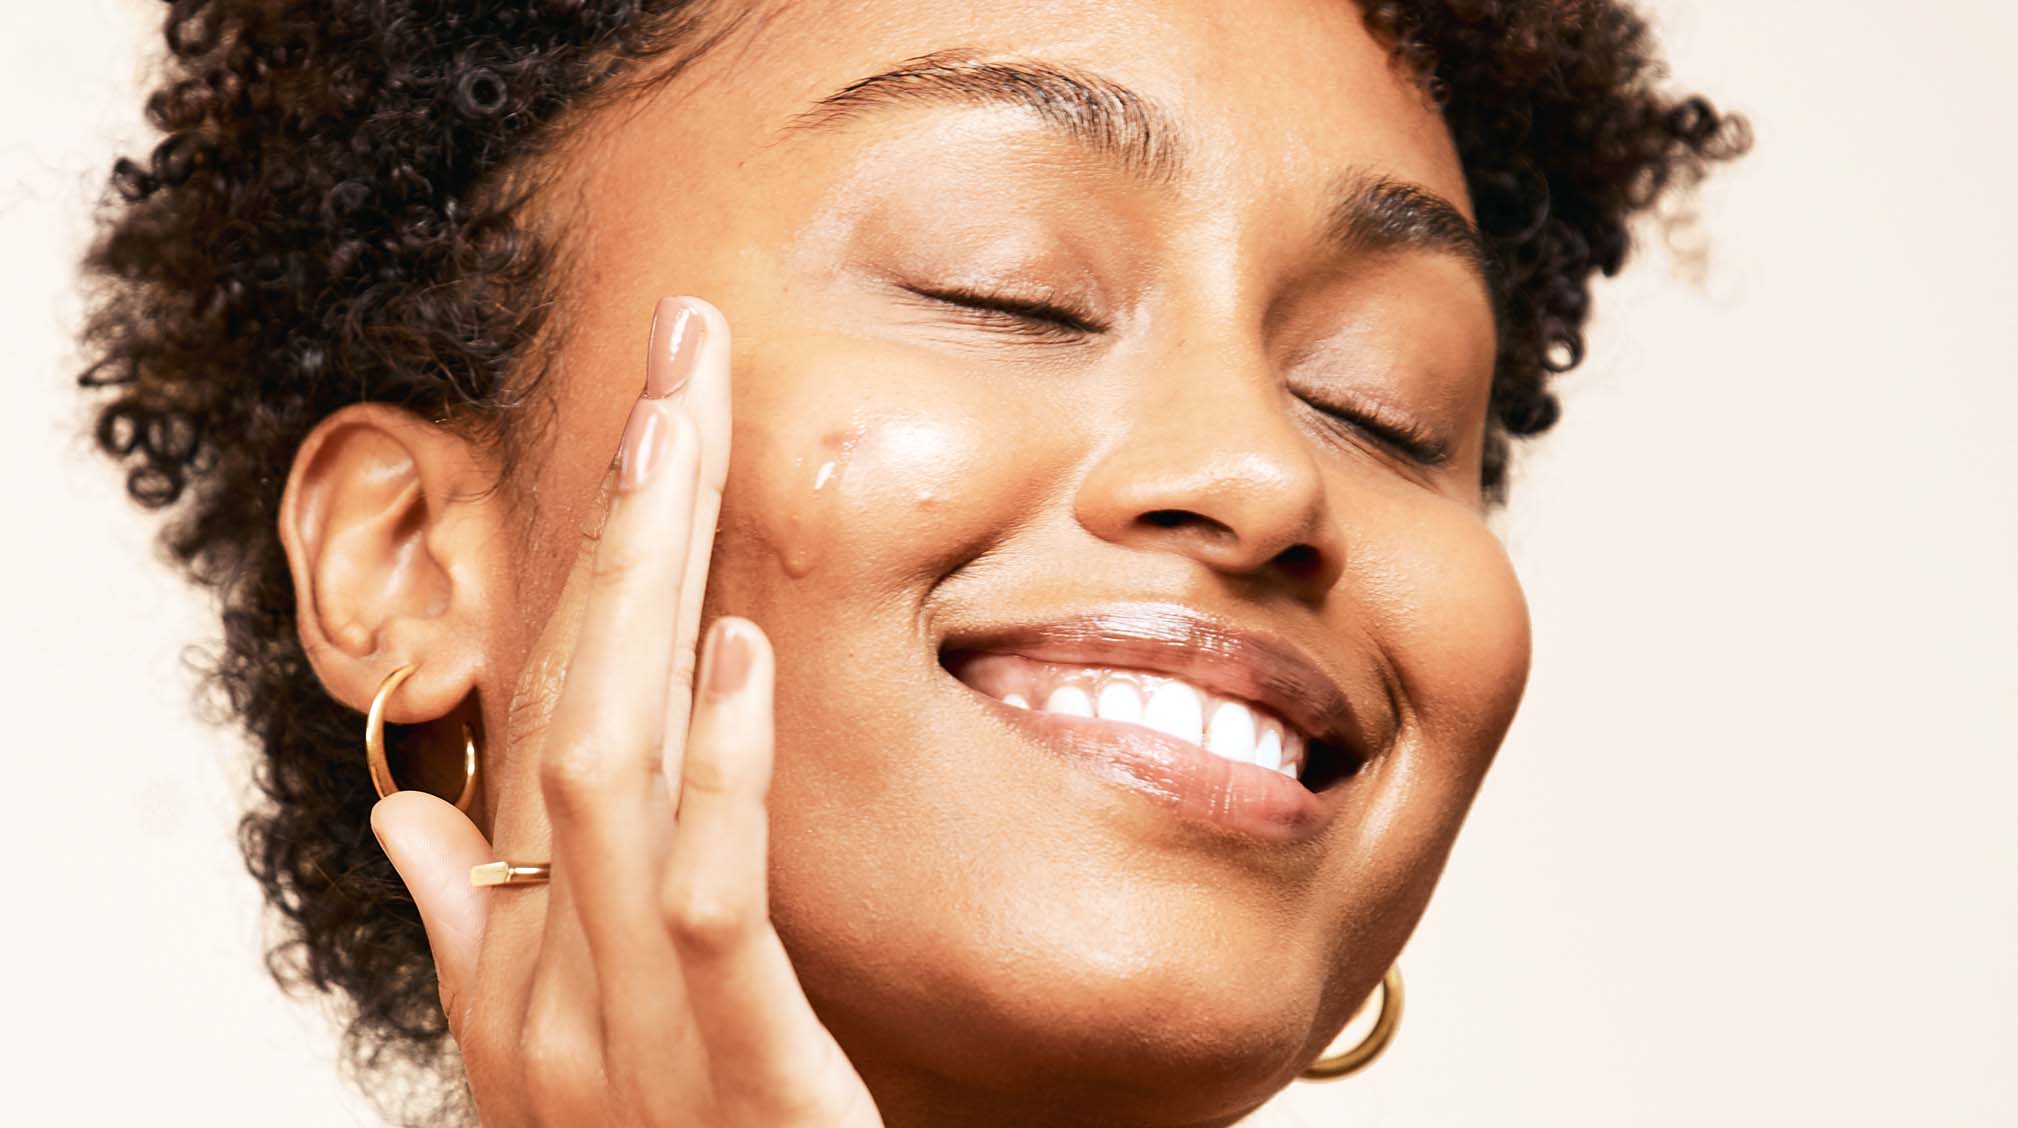 What Is Toner? And Do You Really Need a Skin Toner?